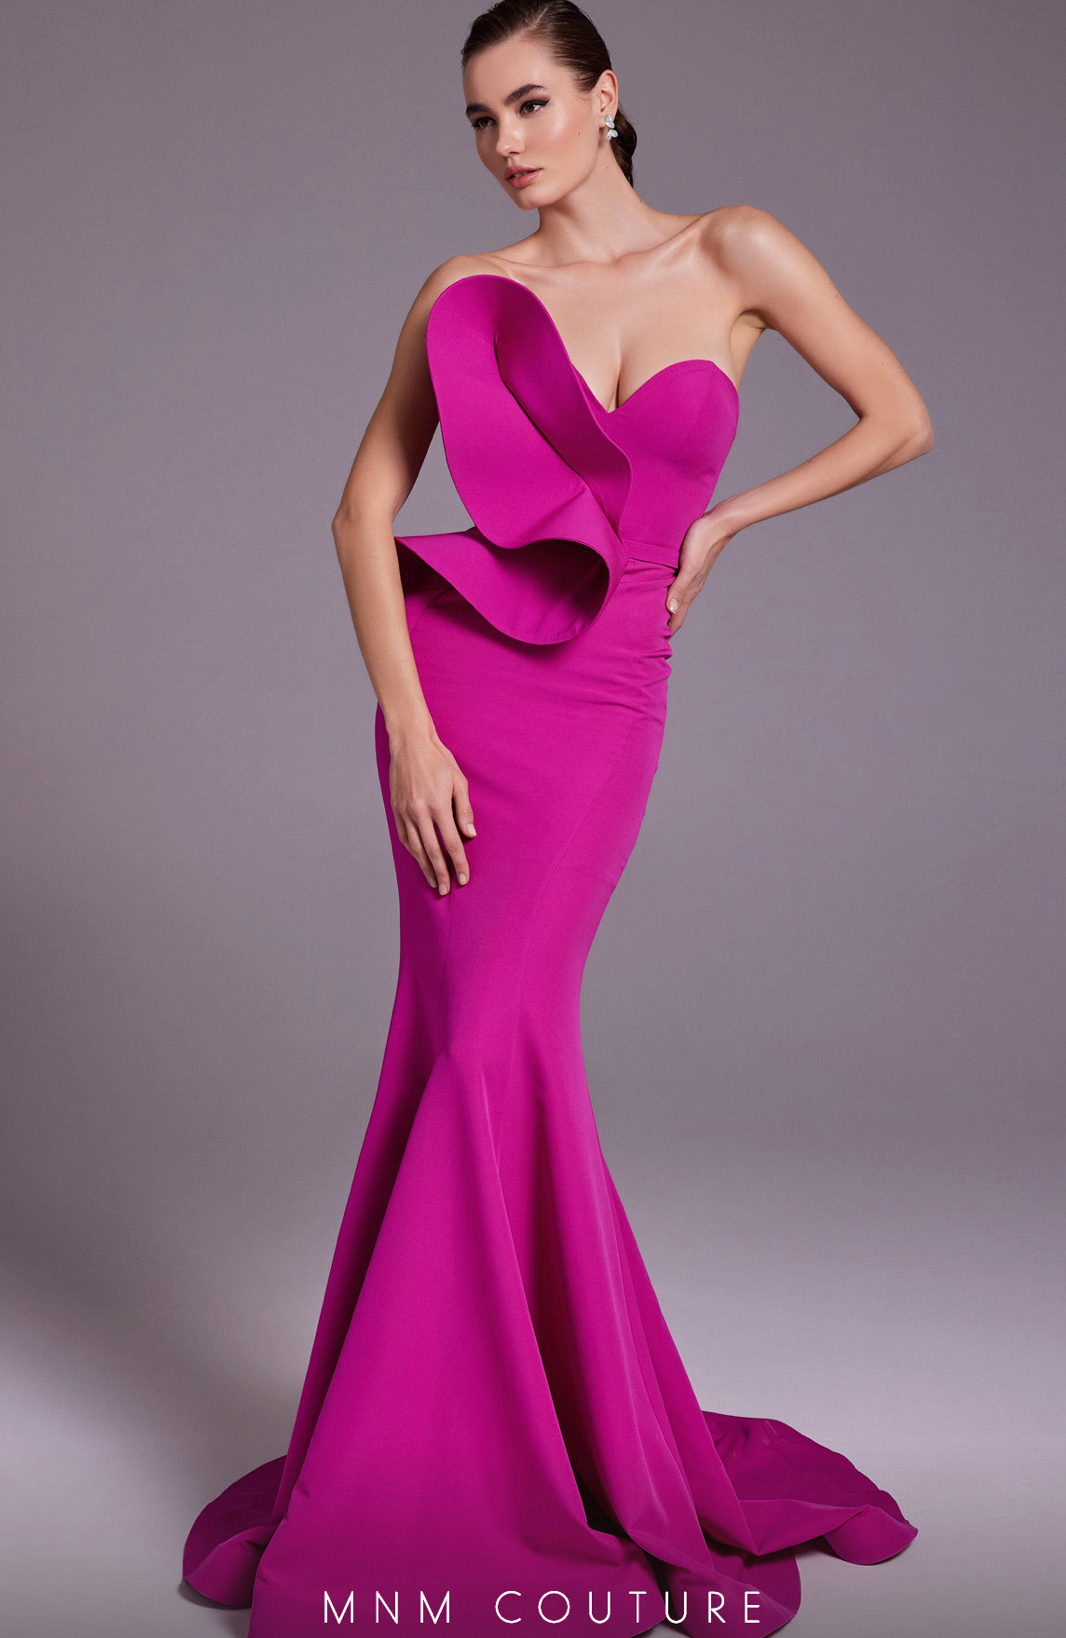 MNM Couture N0548 Dress